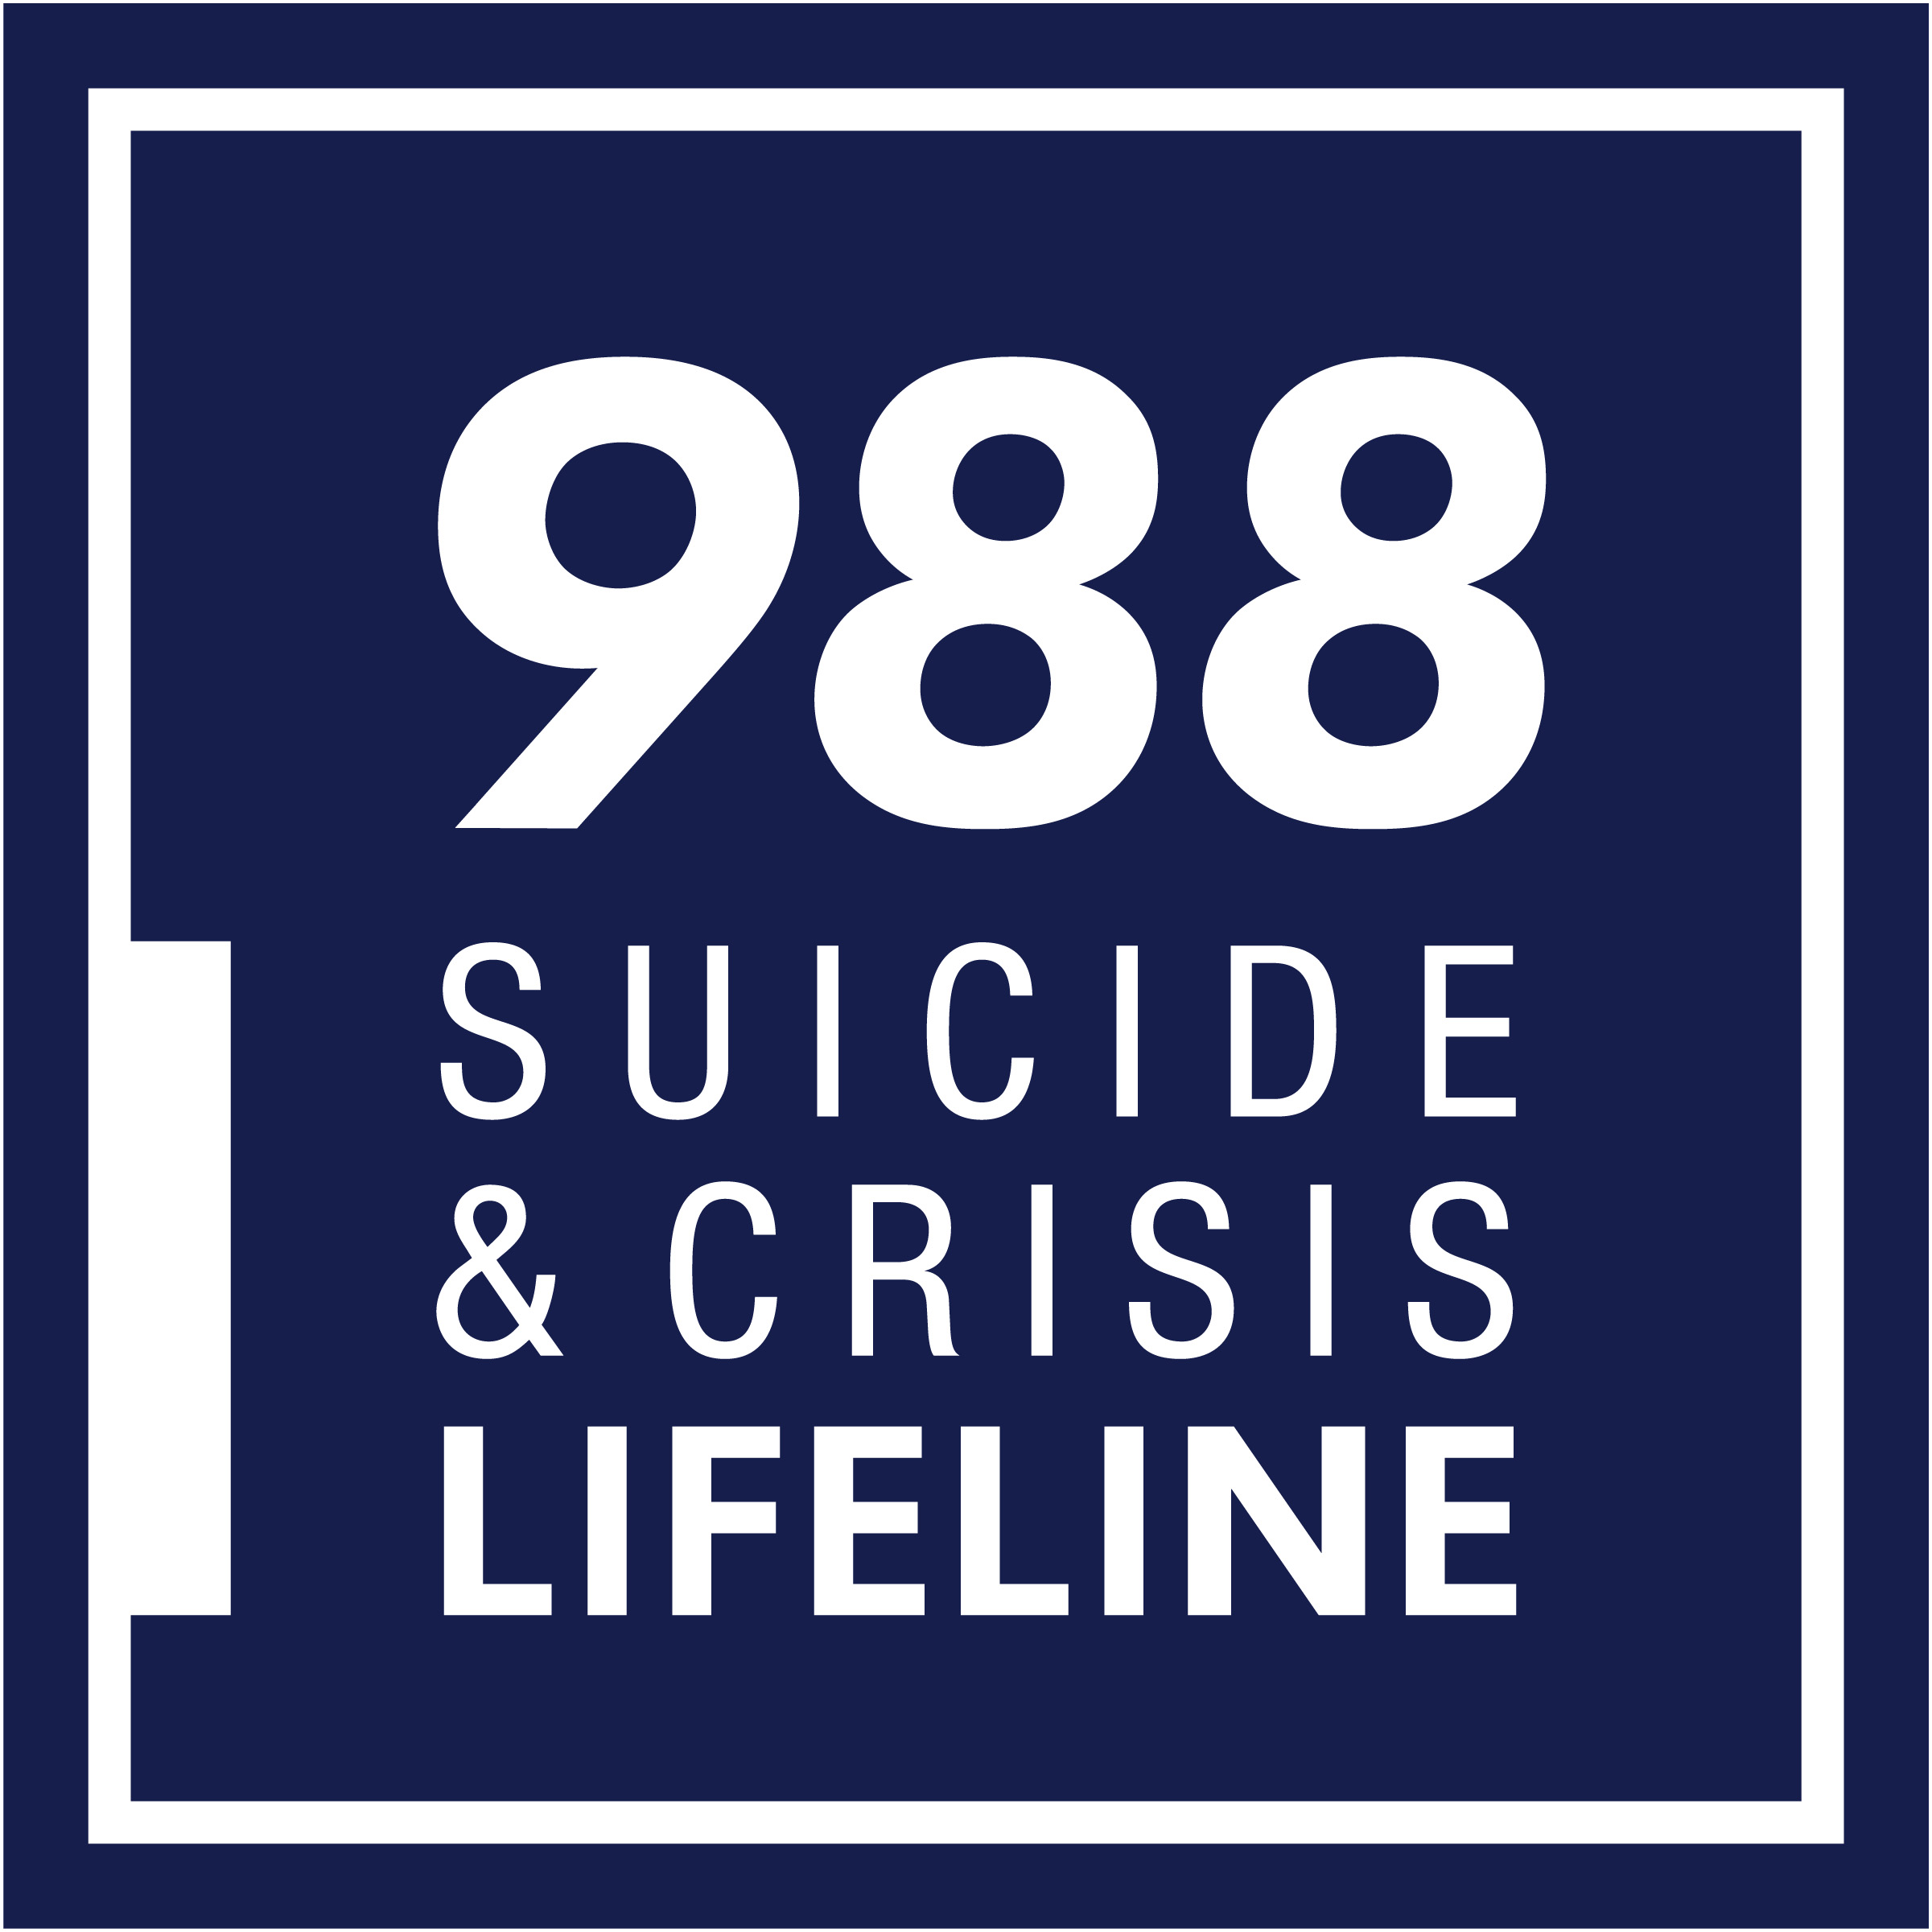 A Suicide Prevention graphic telling people to call the Suicide Prevention Lifeline 988 if they need help 